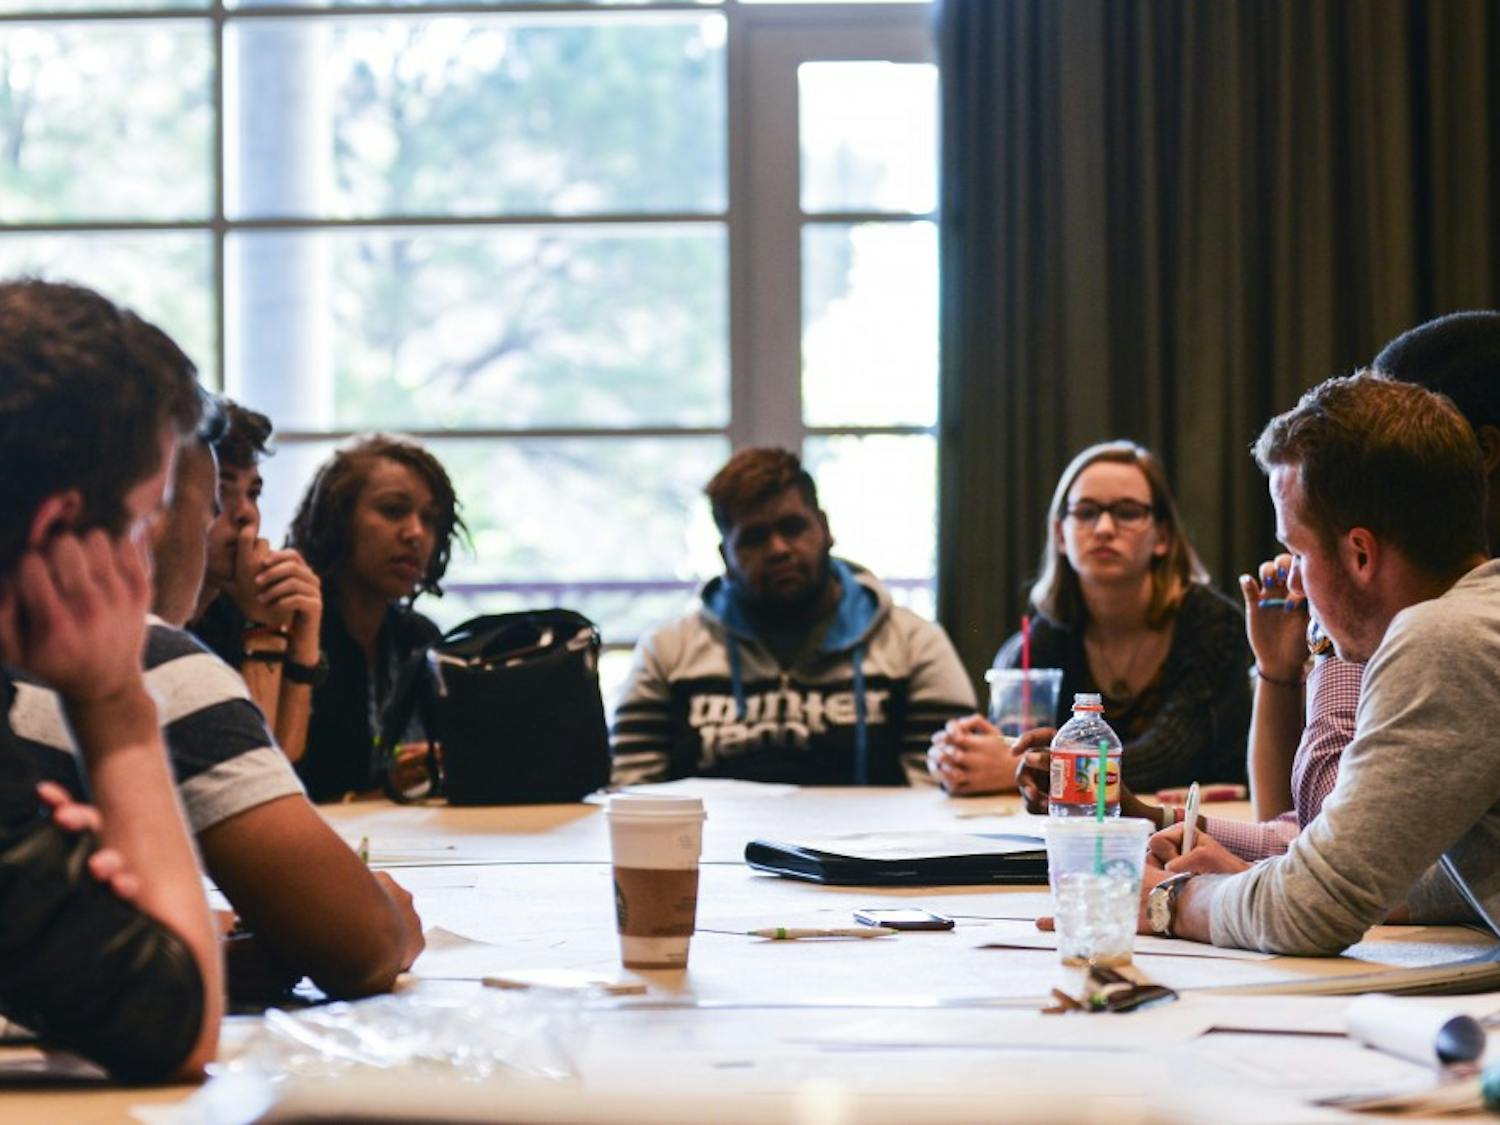 Students discuss safety issues and potential solutions Tuesday evening in a SUB ballroom. The event was organized by LoboRESPECT to address concerns raised at ASUNM’s recent Safety Day.